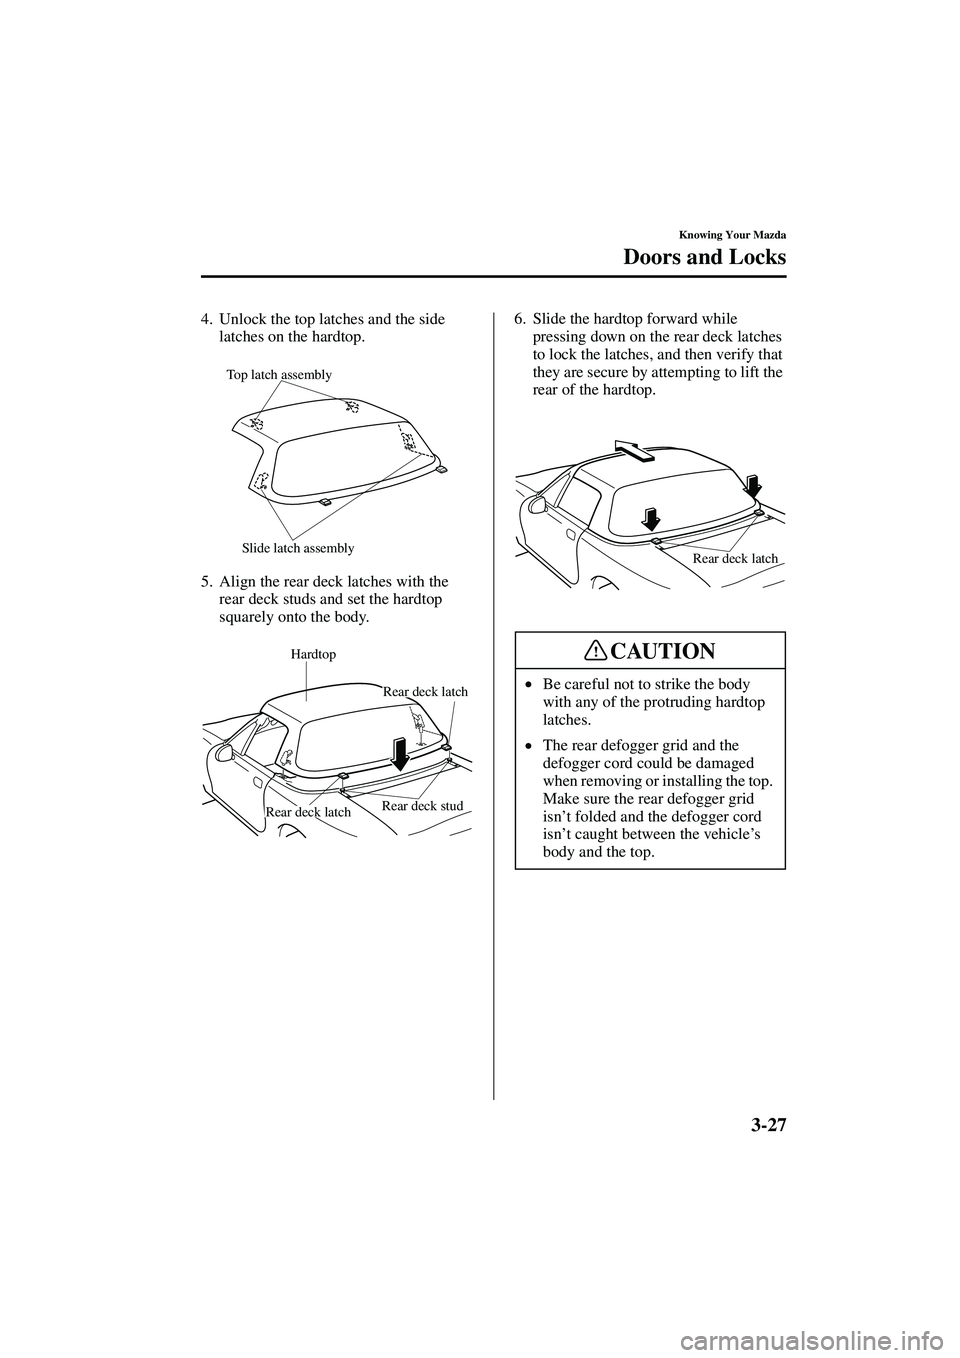 MAZDA MODEL MX-5 MIATA 2004 Repair Manual 3-27
Knowing Your Mazda
Doors and Locks
Form No. 8S15-EA-03G
4. Unlock the top latches and the side latches on the hardtop.
5. Align the rear deck latches with the  rear deck studs and set the hardtop